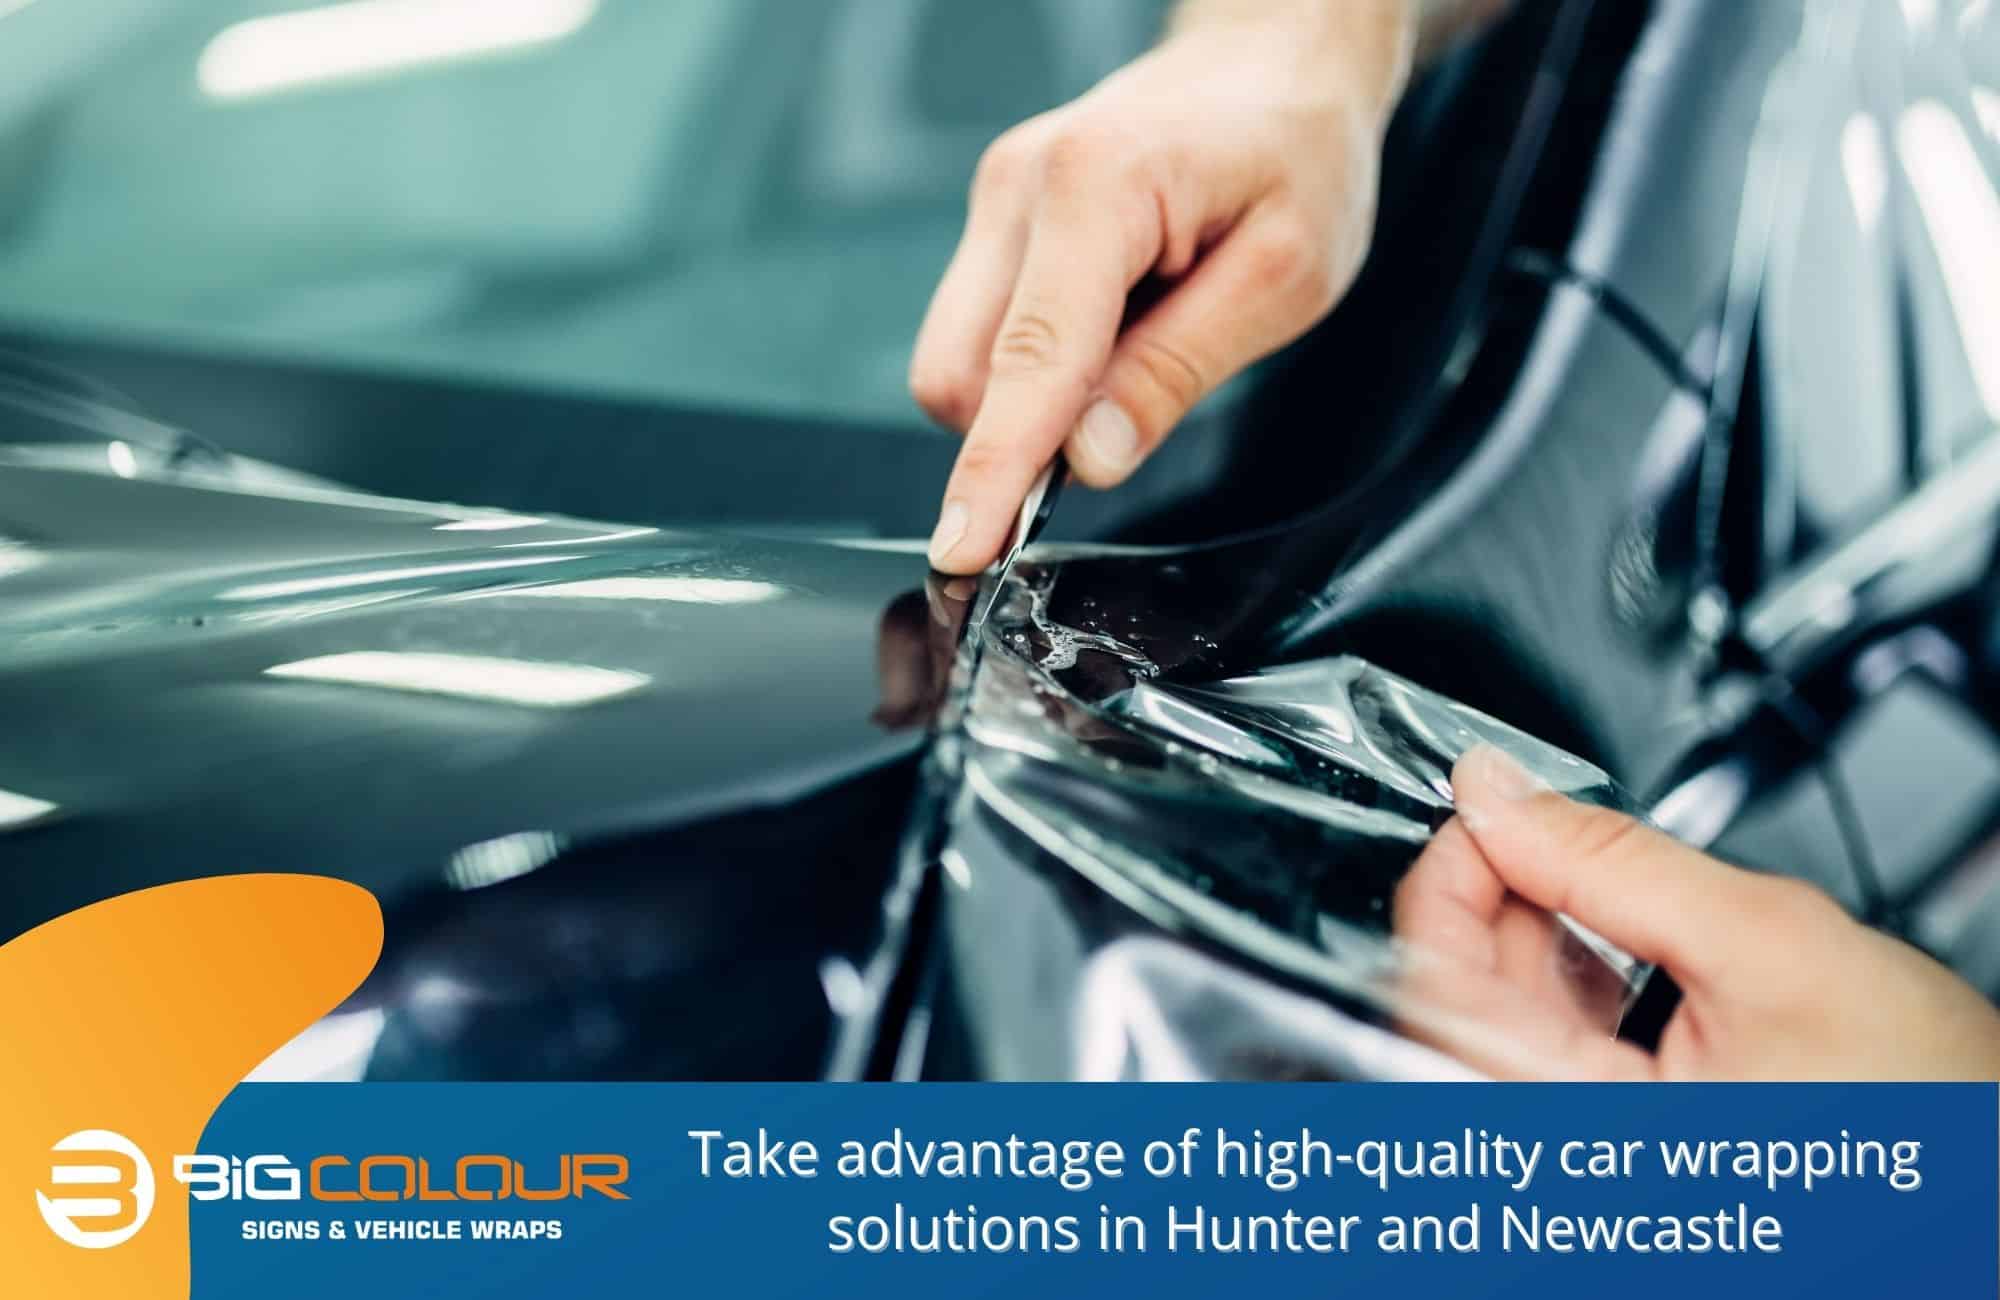 Take advantage of high-quality car wrapping solutions in Hunter and Newcastle